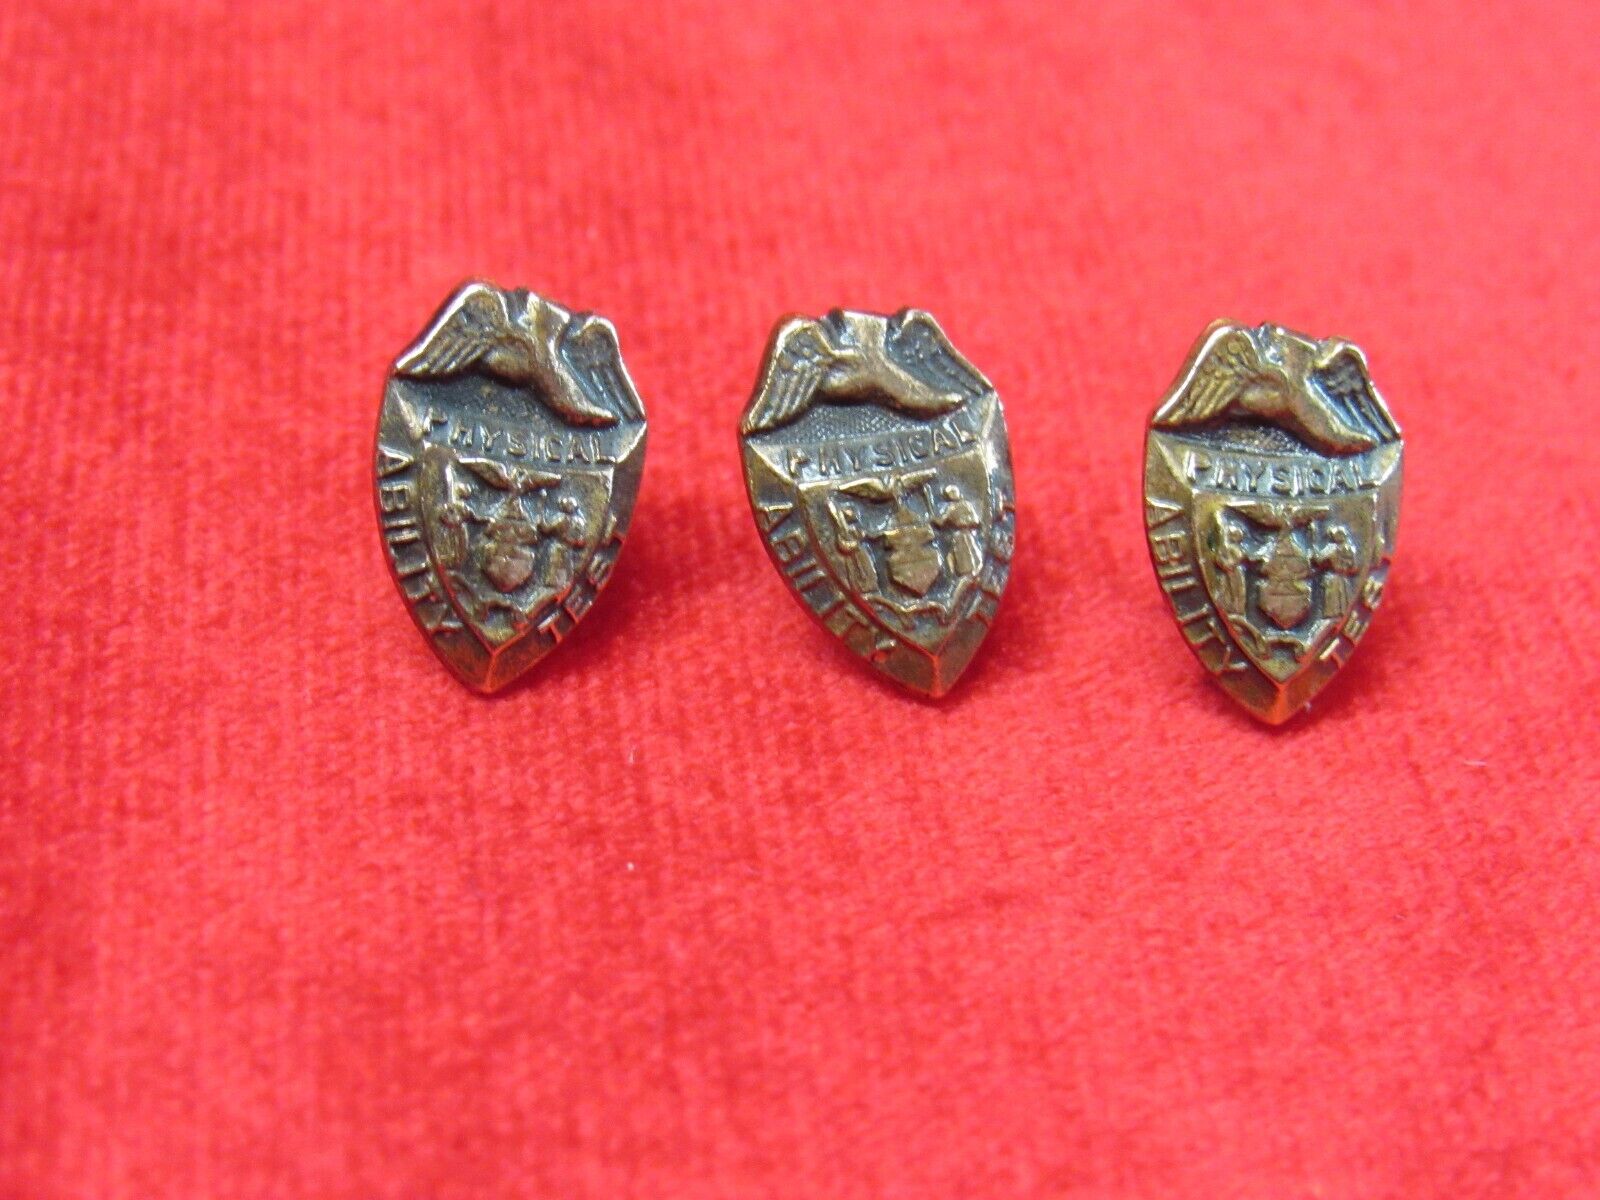 Lot Of 3 Vintage Gold Tone Physical Ability Test Pins.